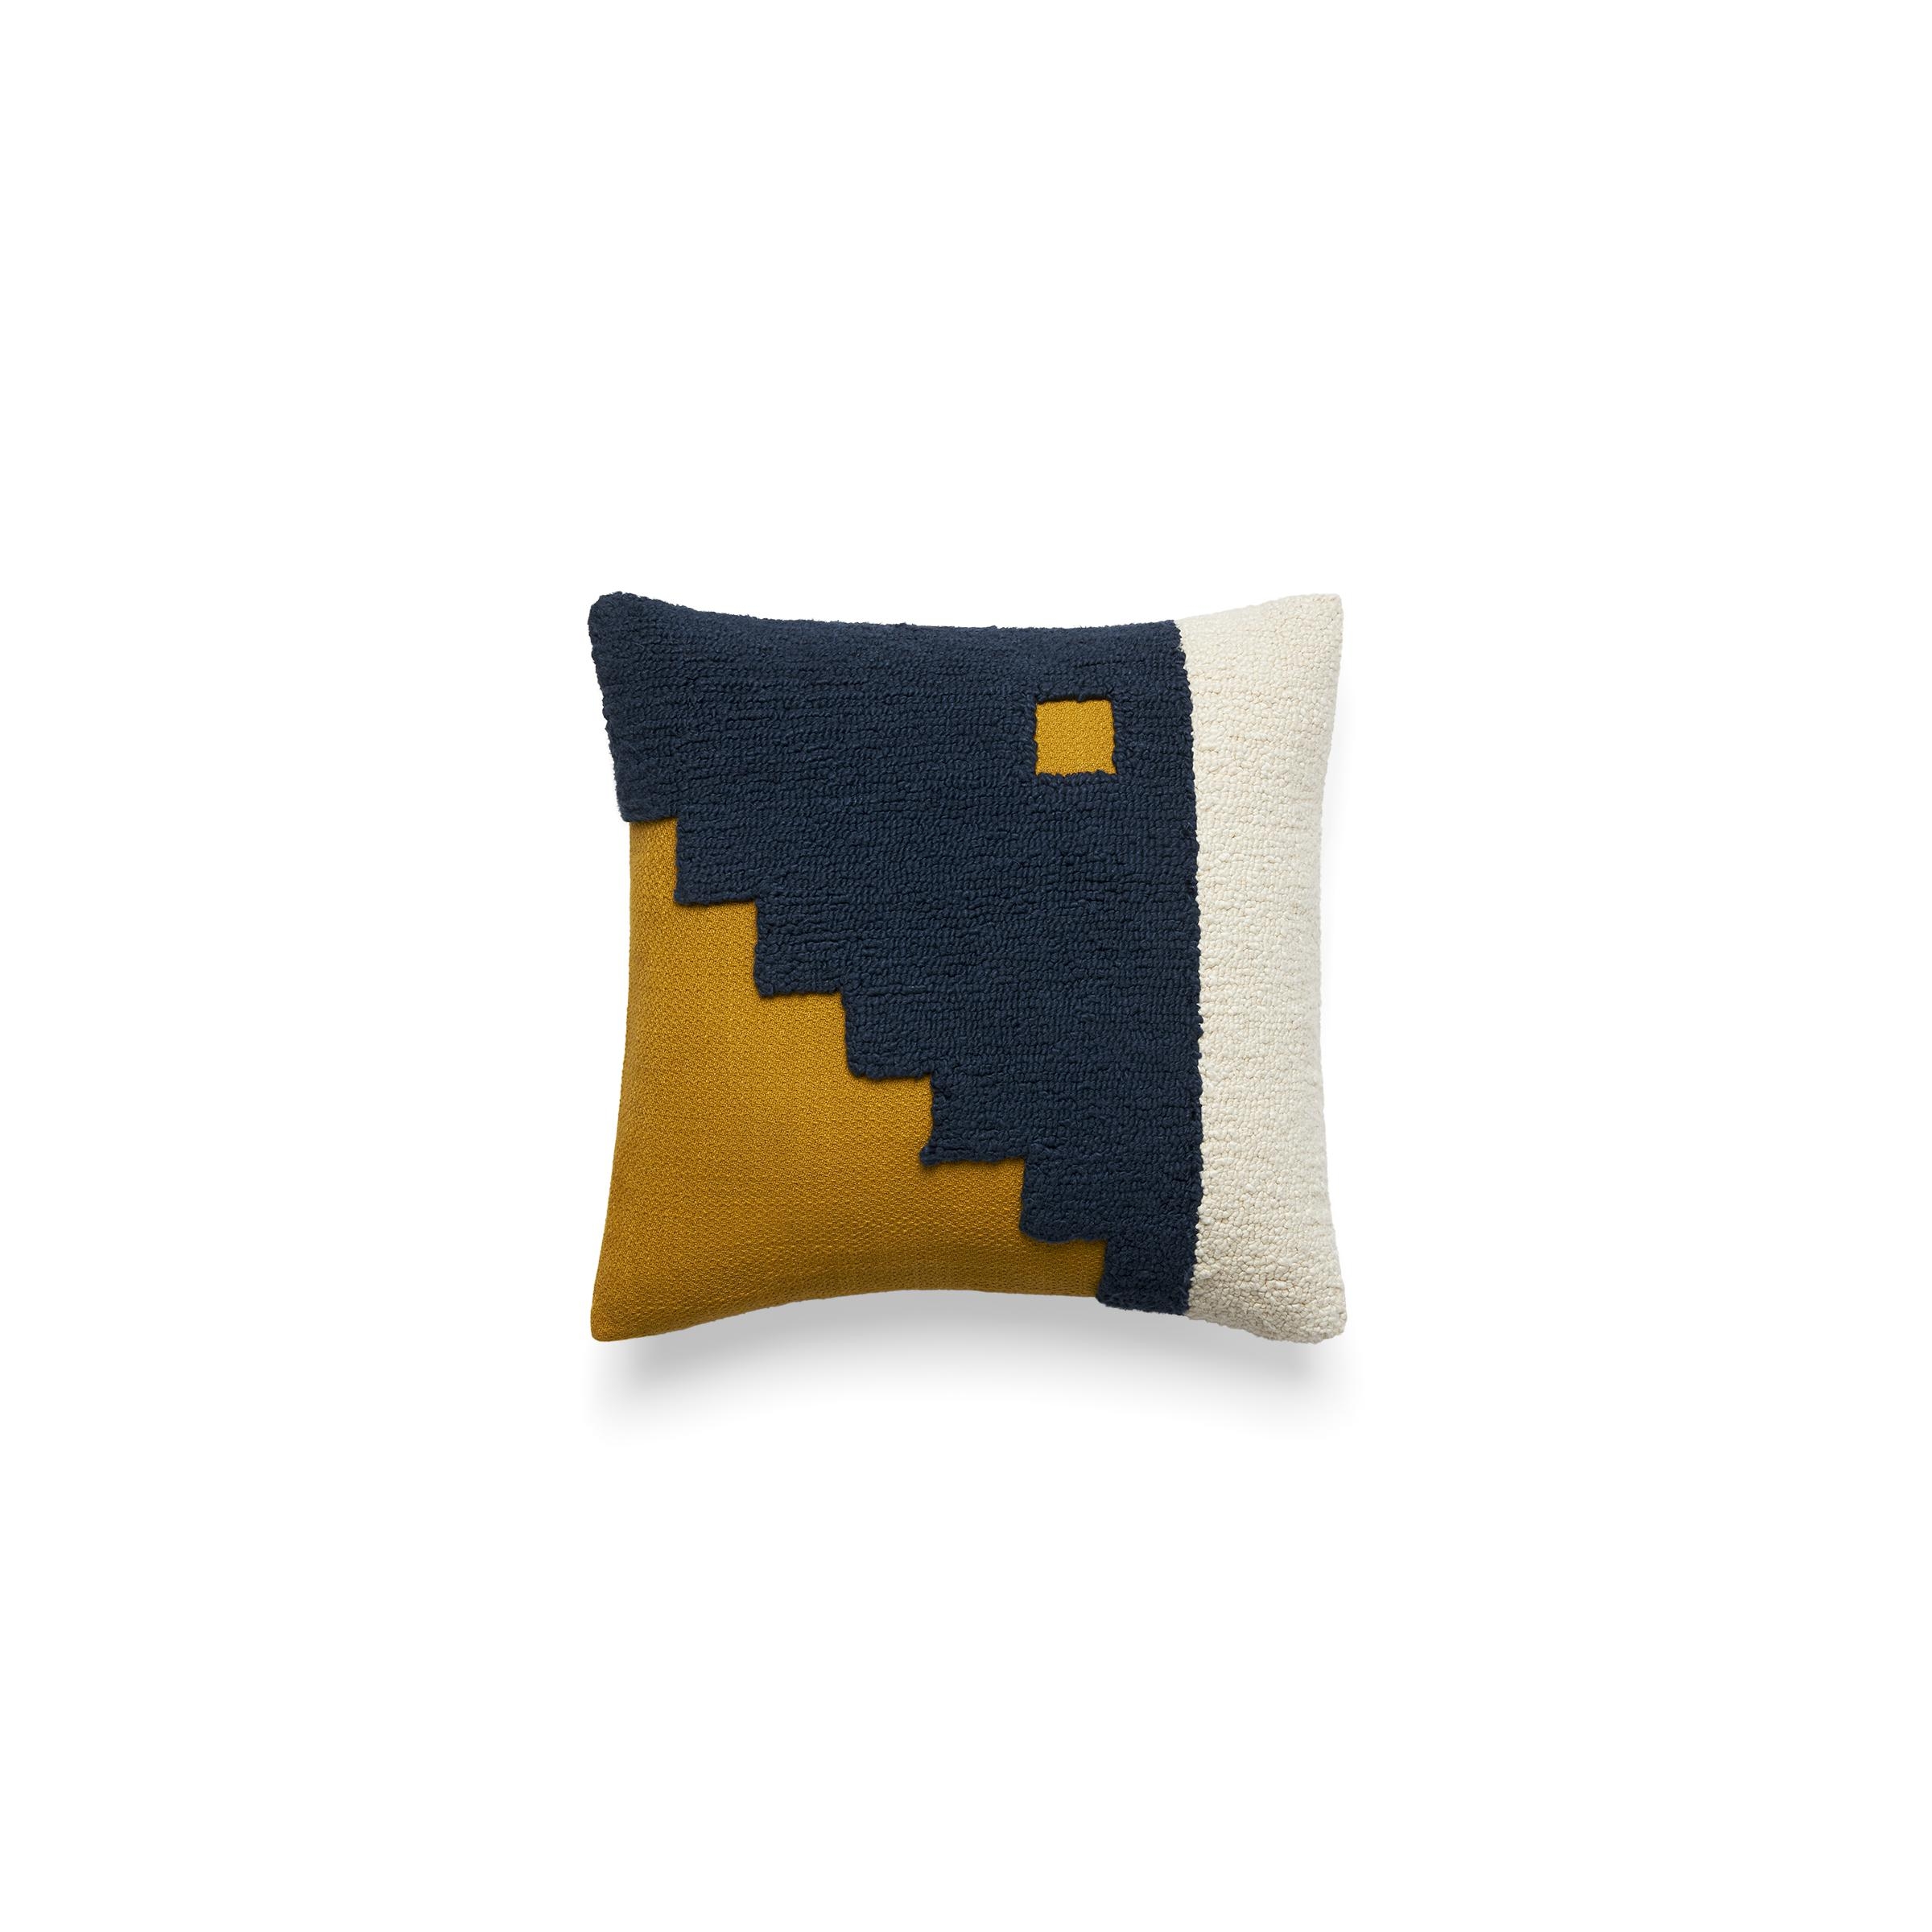 Pixel Pillow Cover in Multi - Image 0